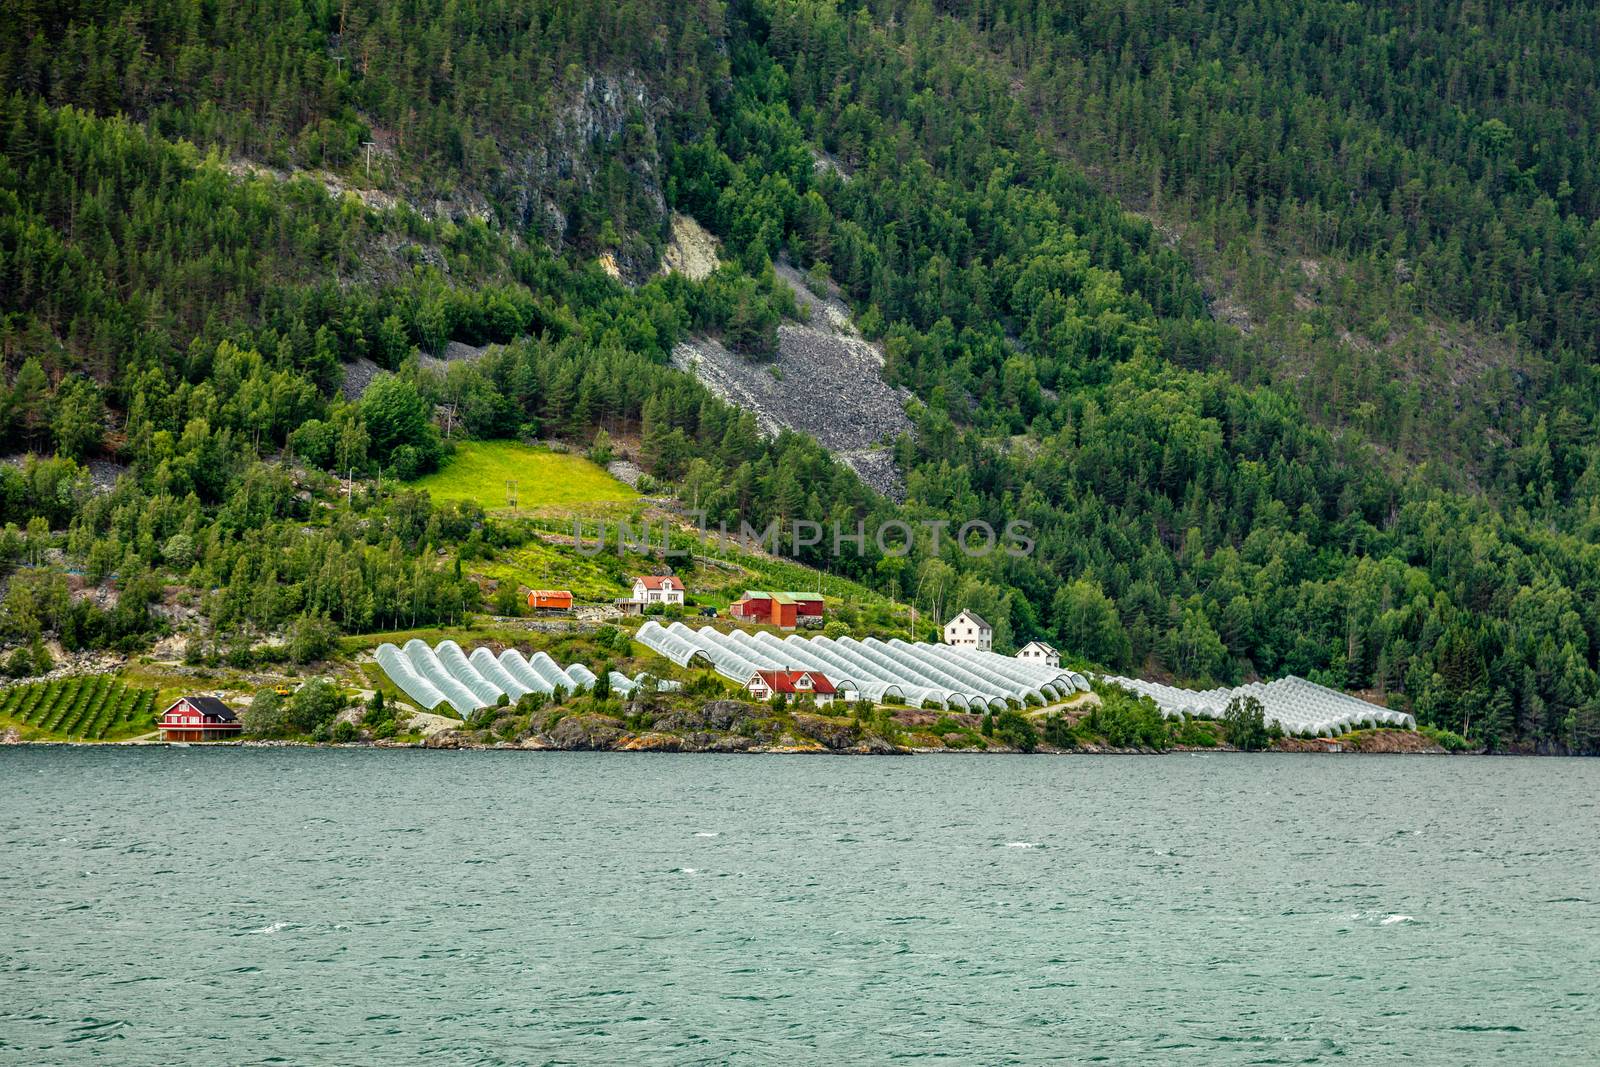 Norwegian agricultural farm with greenhouses on the hill at Naer by ambeon